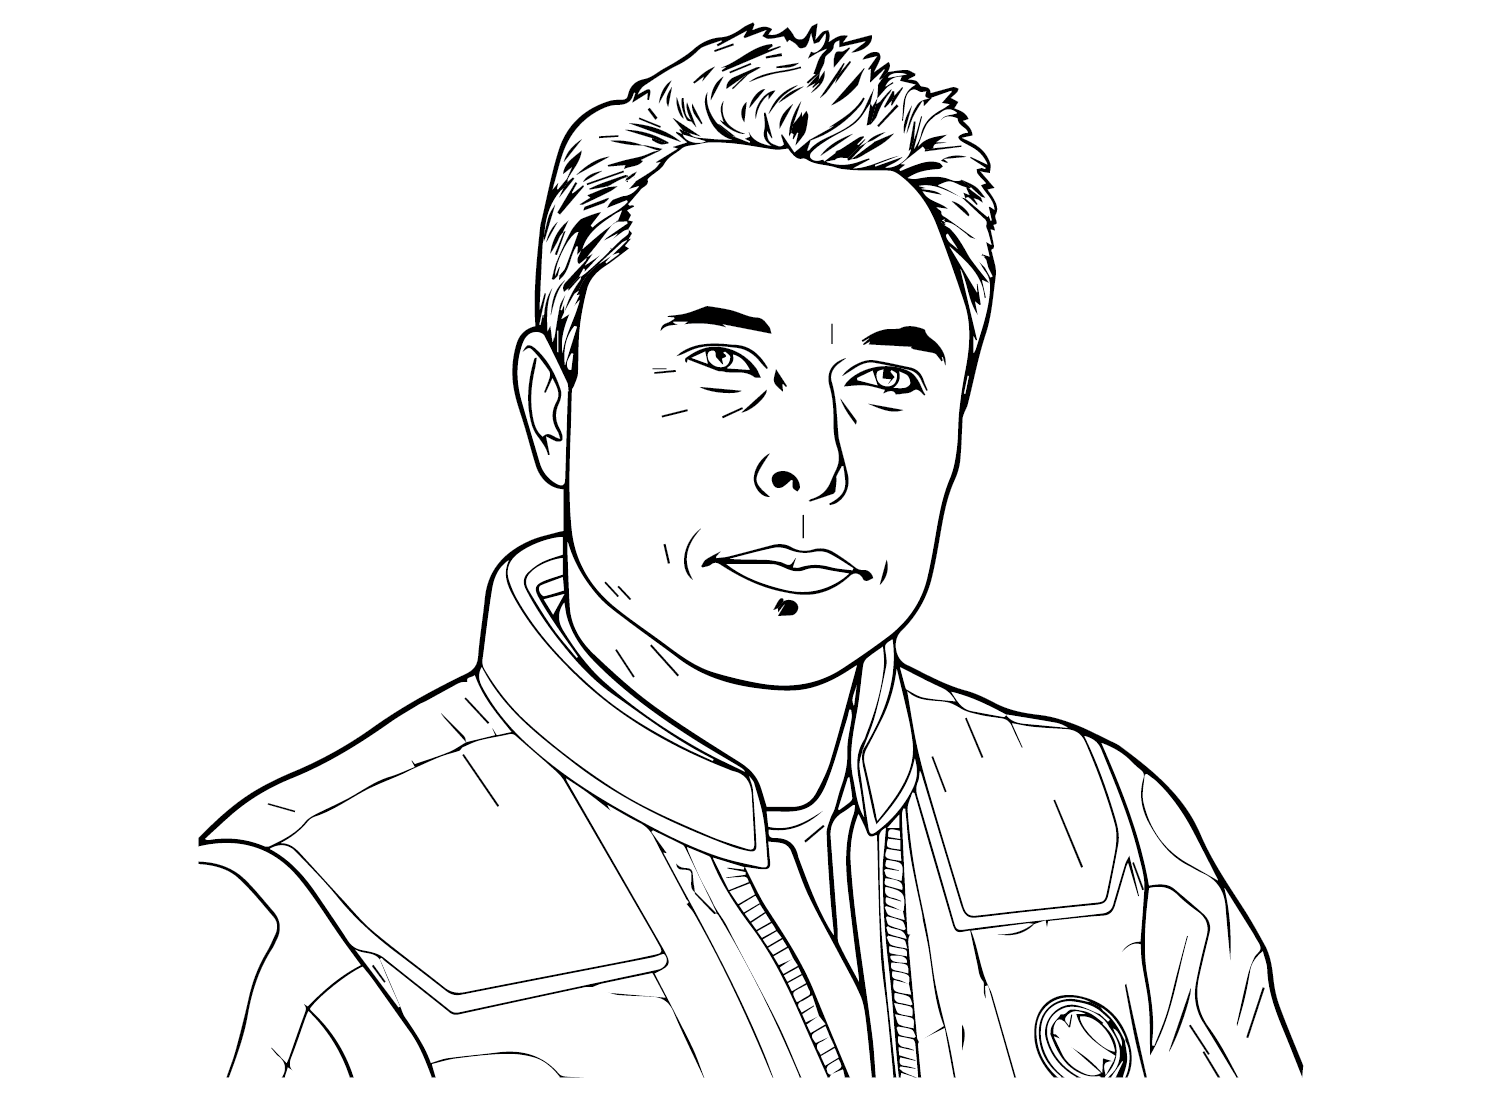 Elon Musk to Print Coloring Page